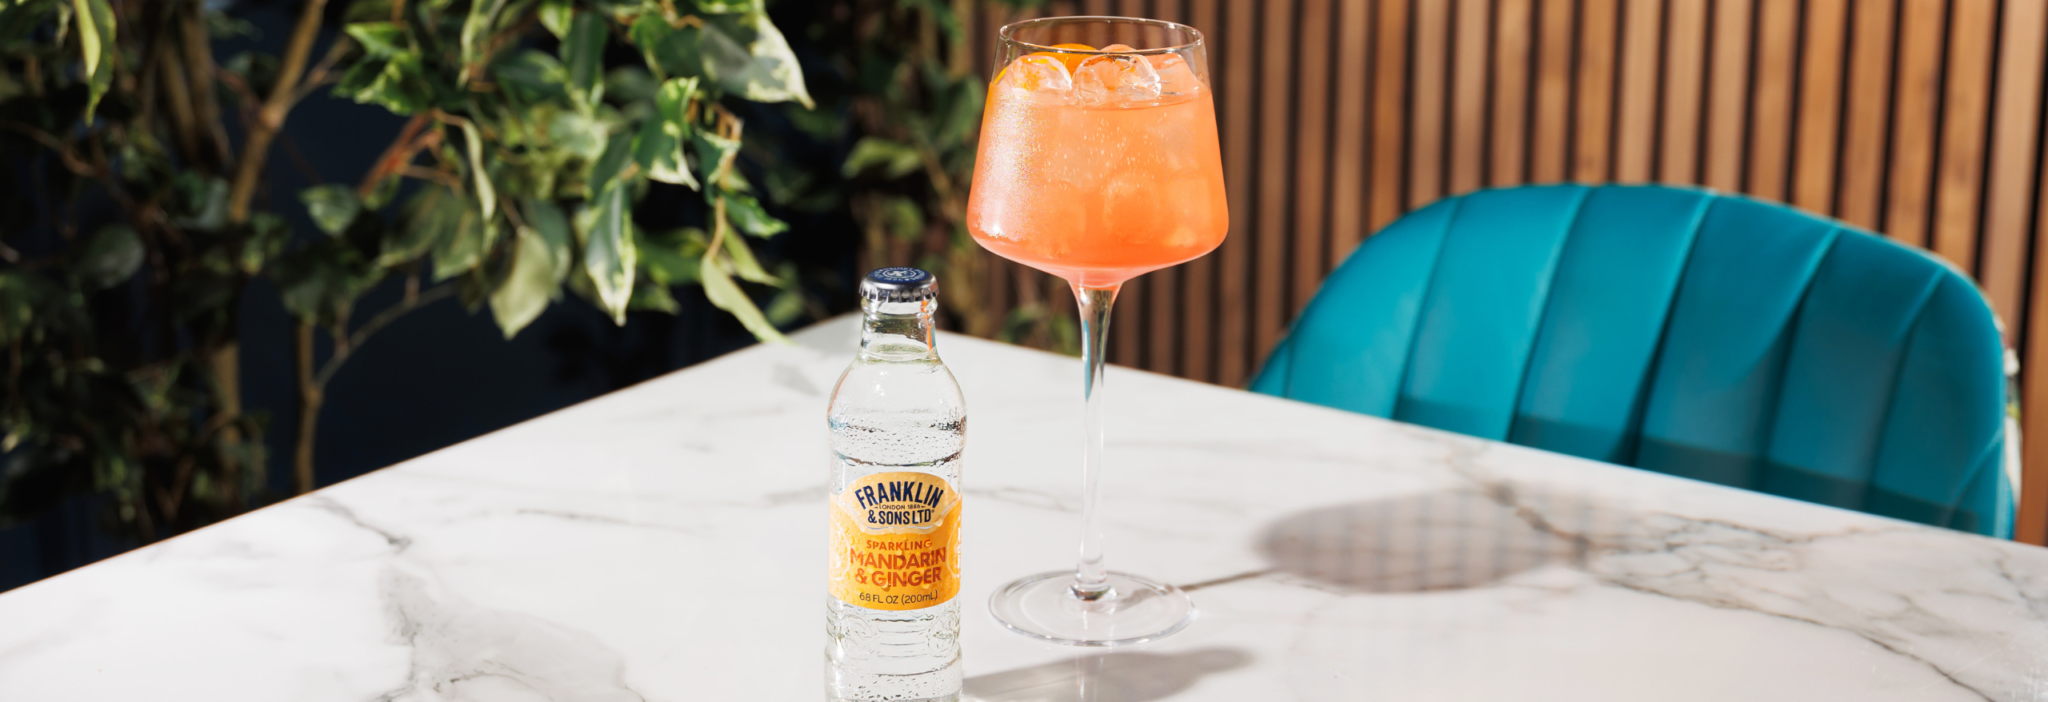 Spritz cocktail with sparkling mandarin and ginger soda | Franklin & Sons